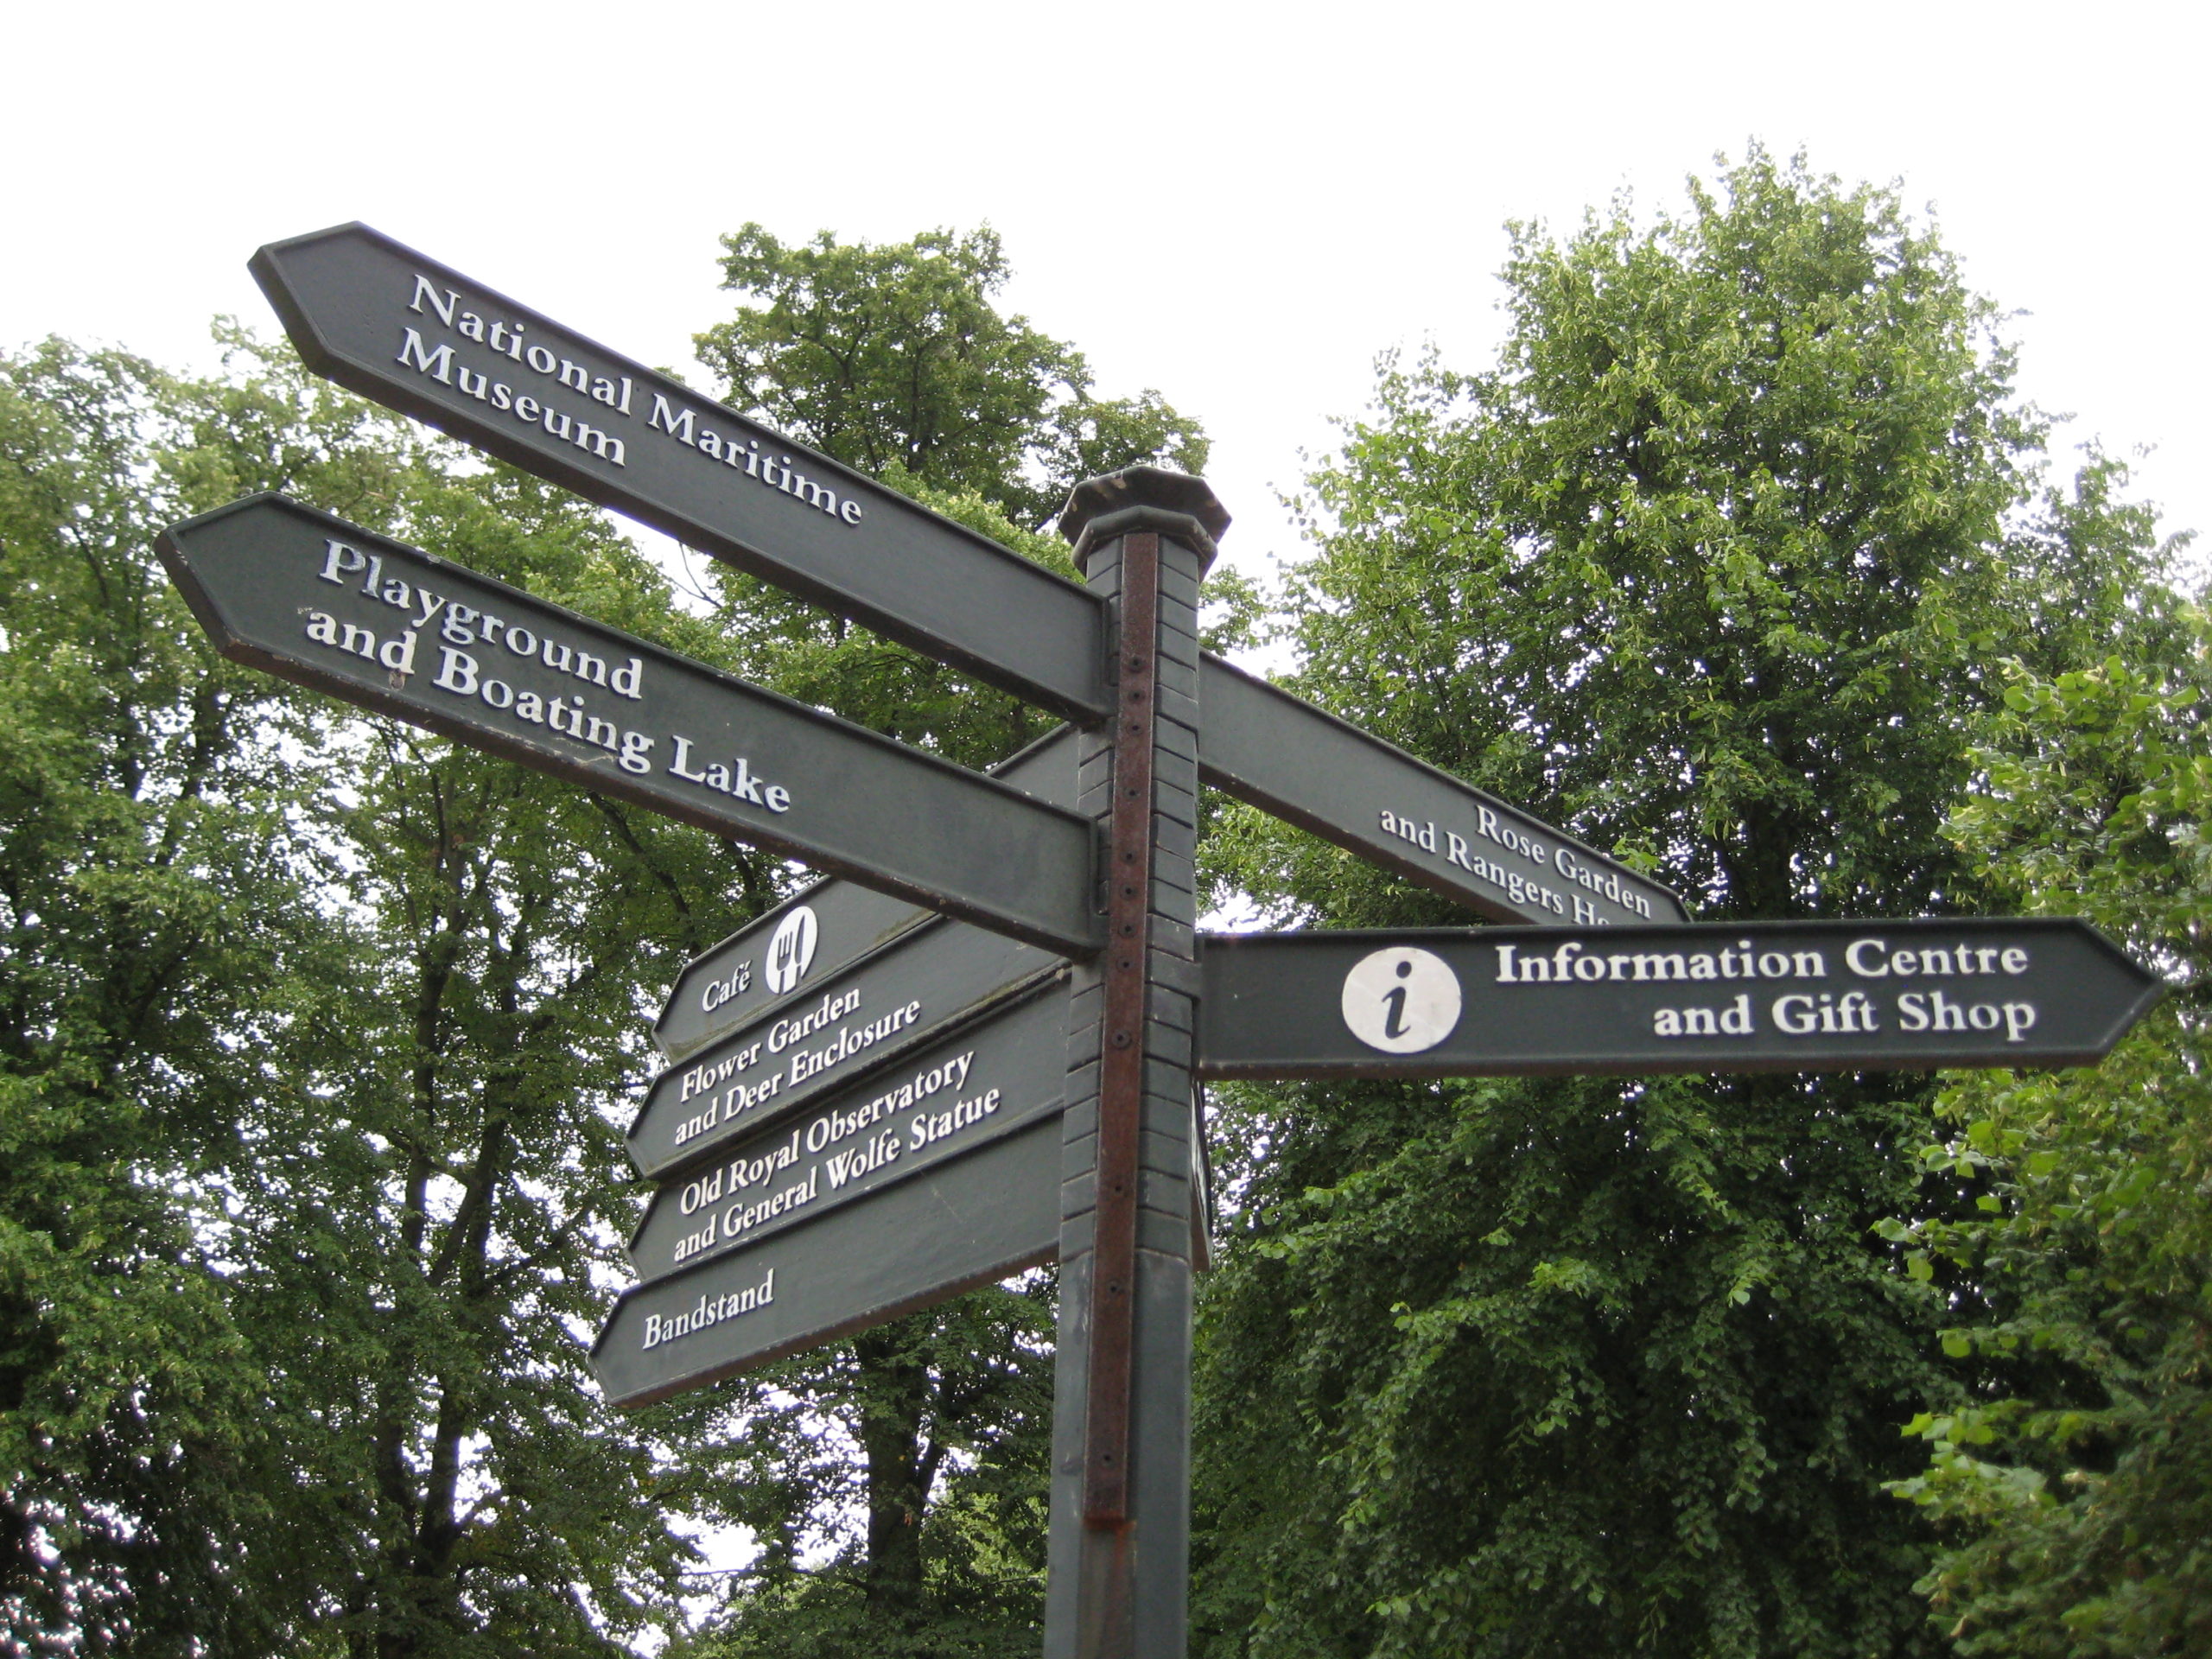 my journey: various signs on a post in a London park